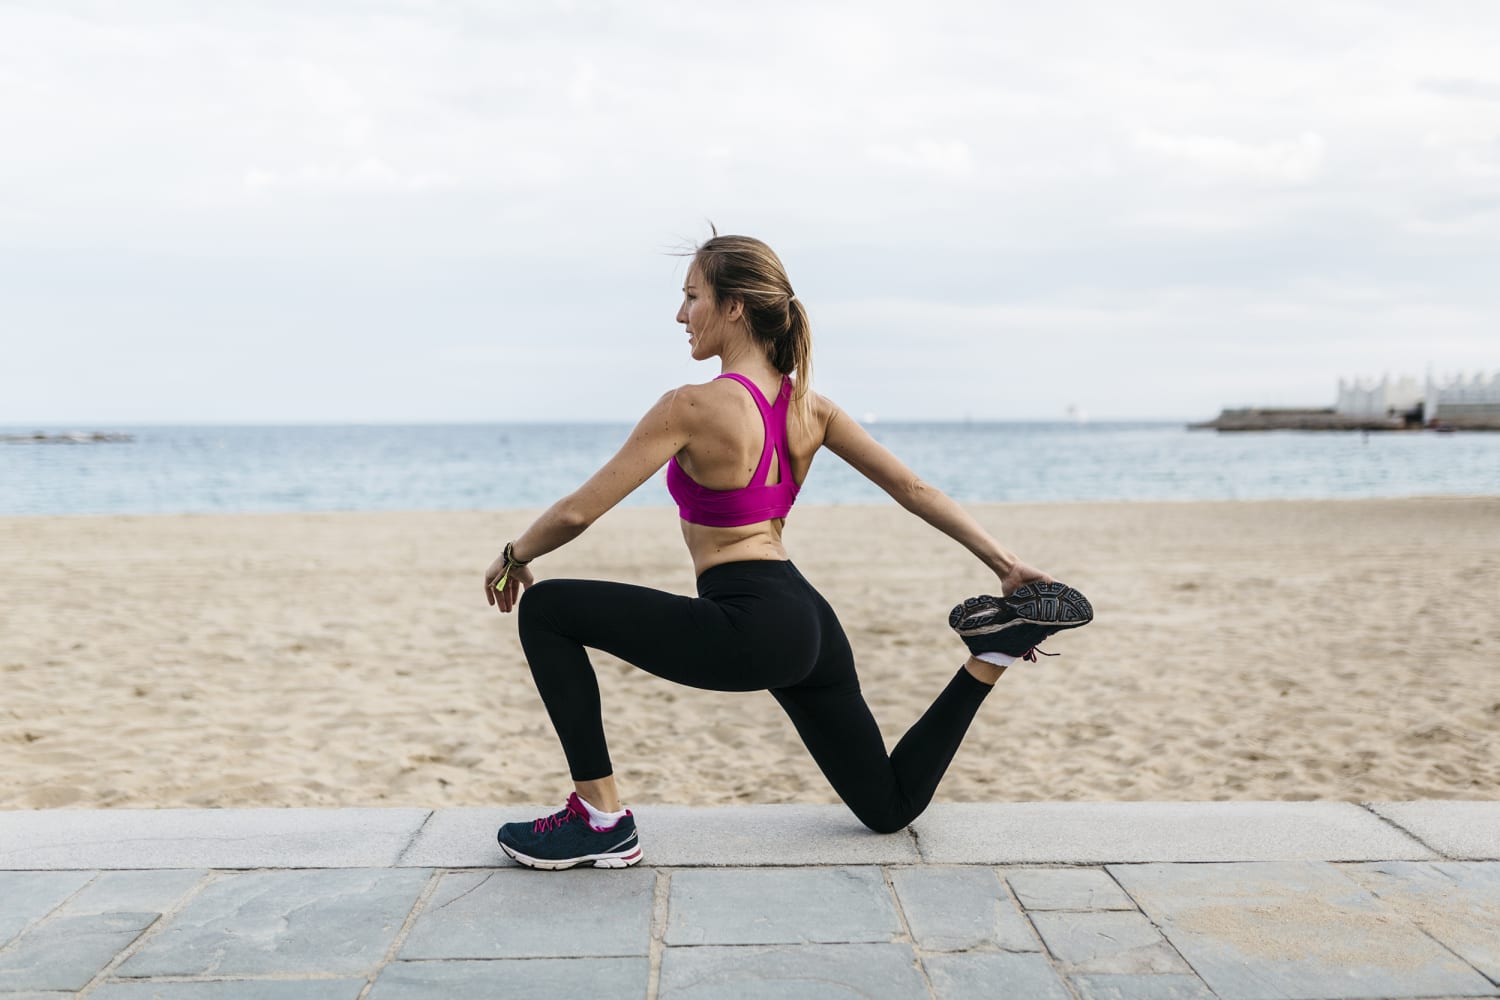 Step to the side and feel the burn: How side steps exercise can tone your  glutes, hips, and thighs